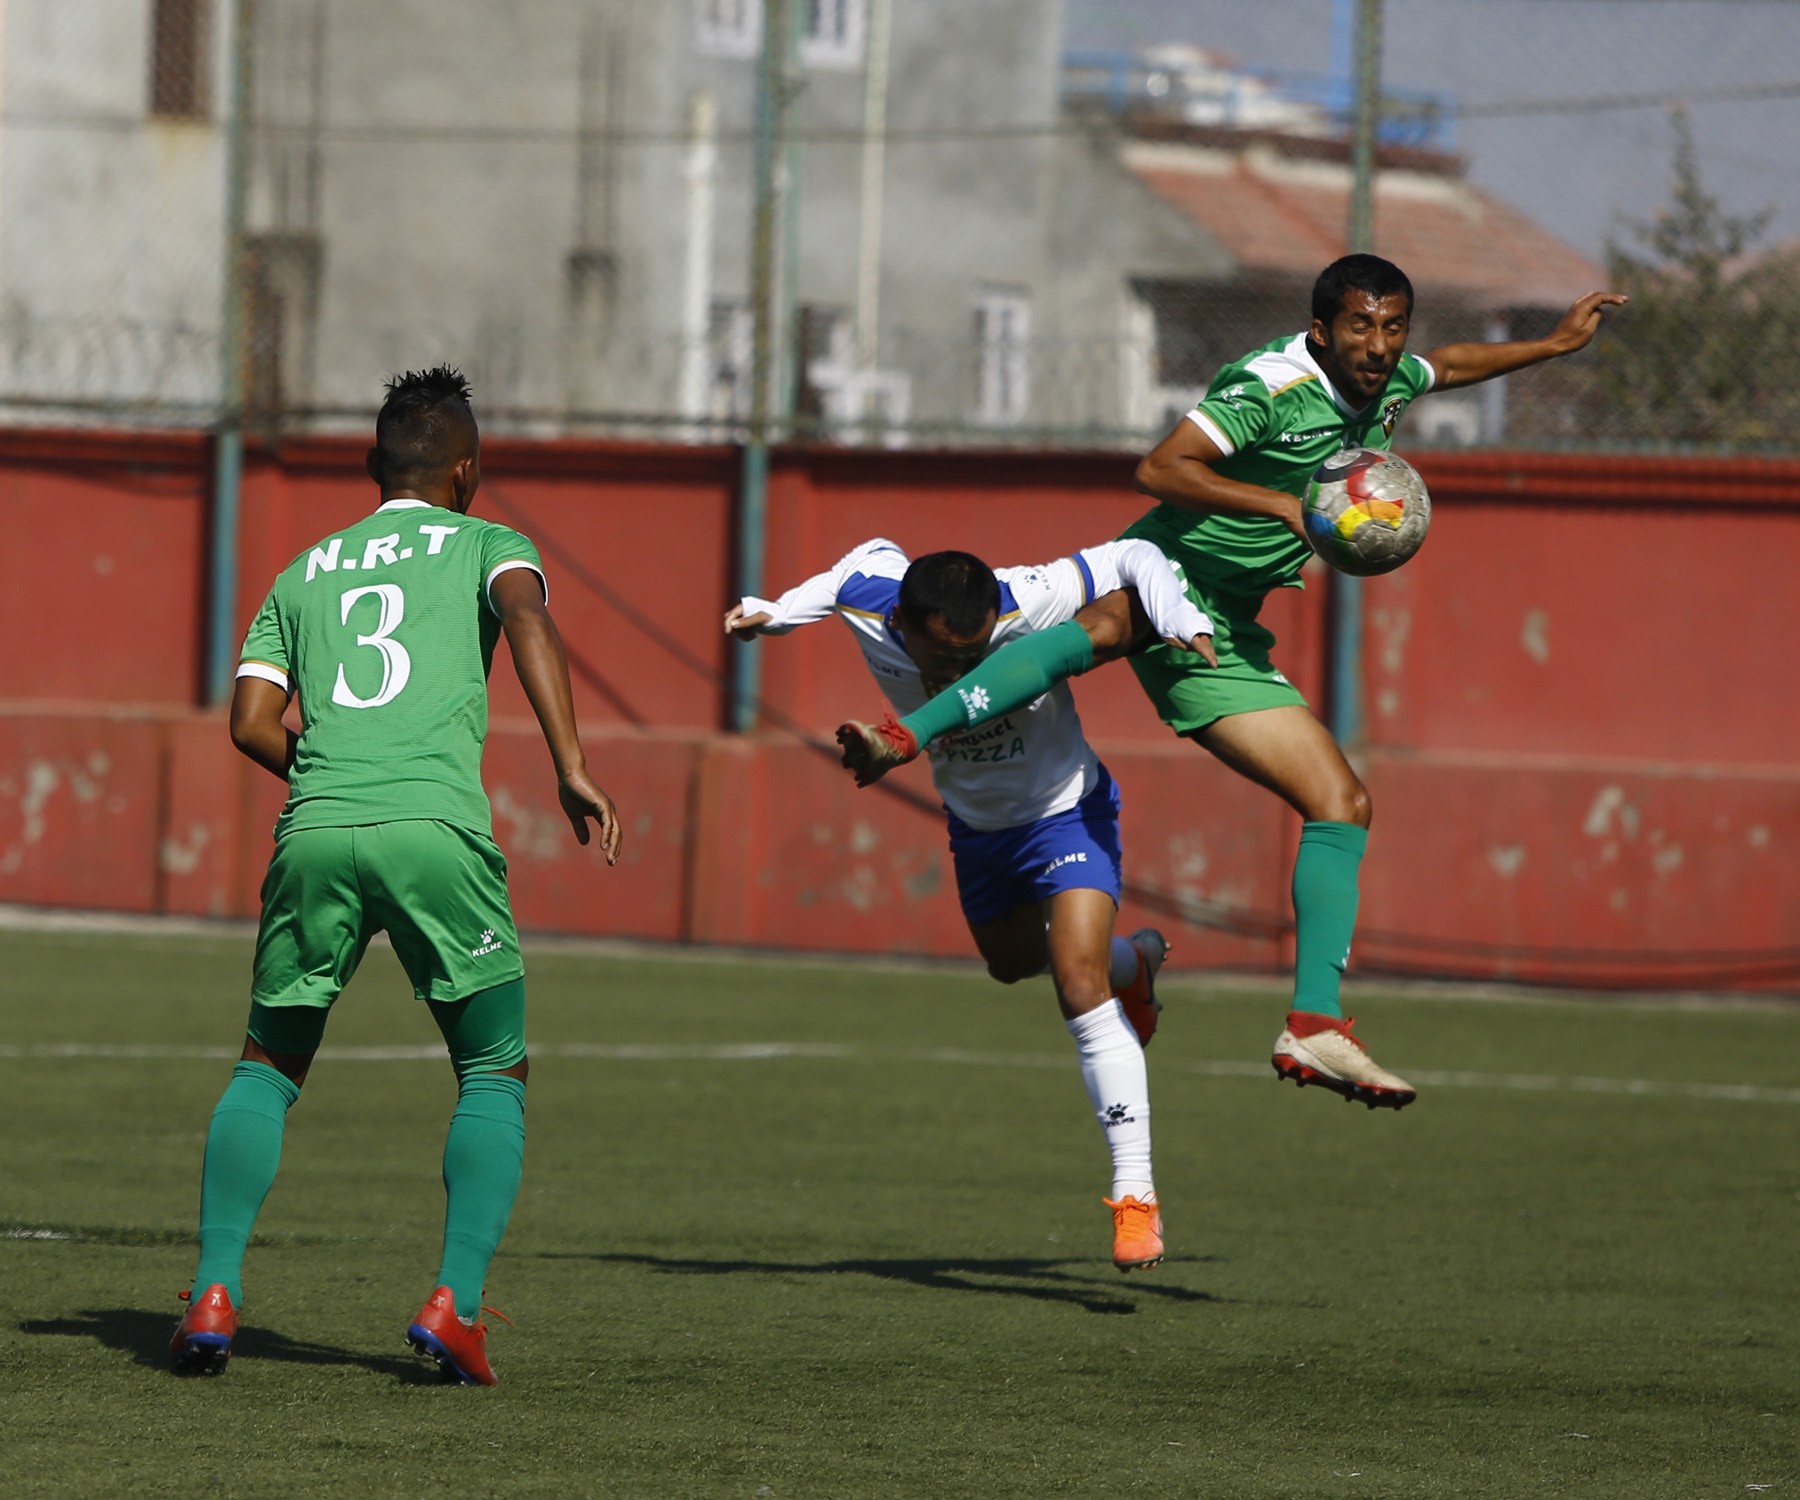 martyrs-memorial-a-division-league-three-star-climbs-to-third-position